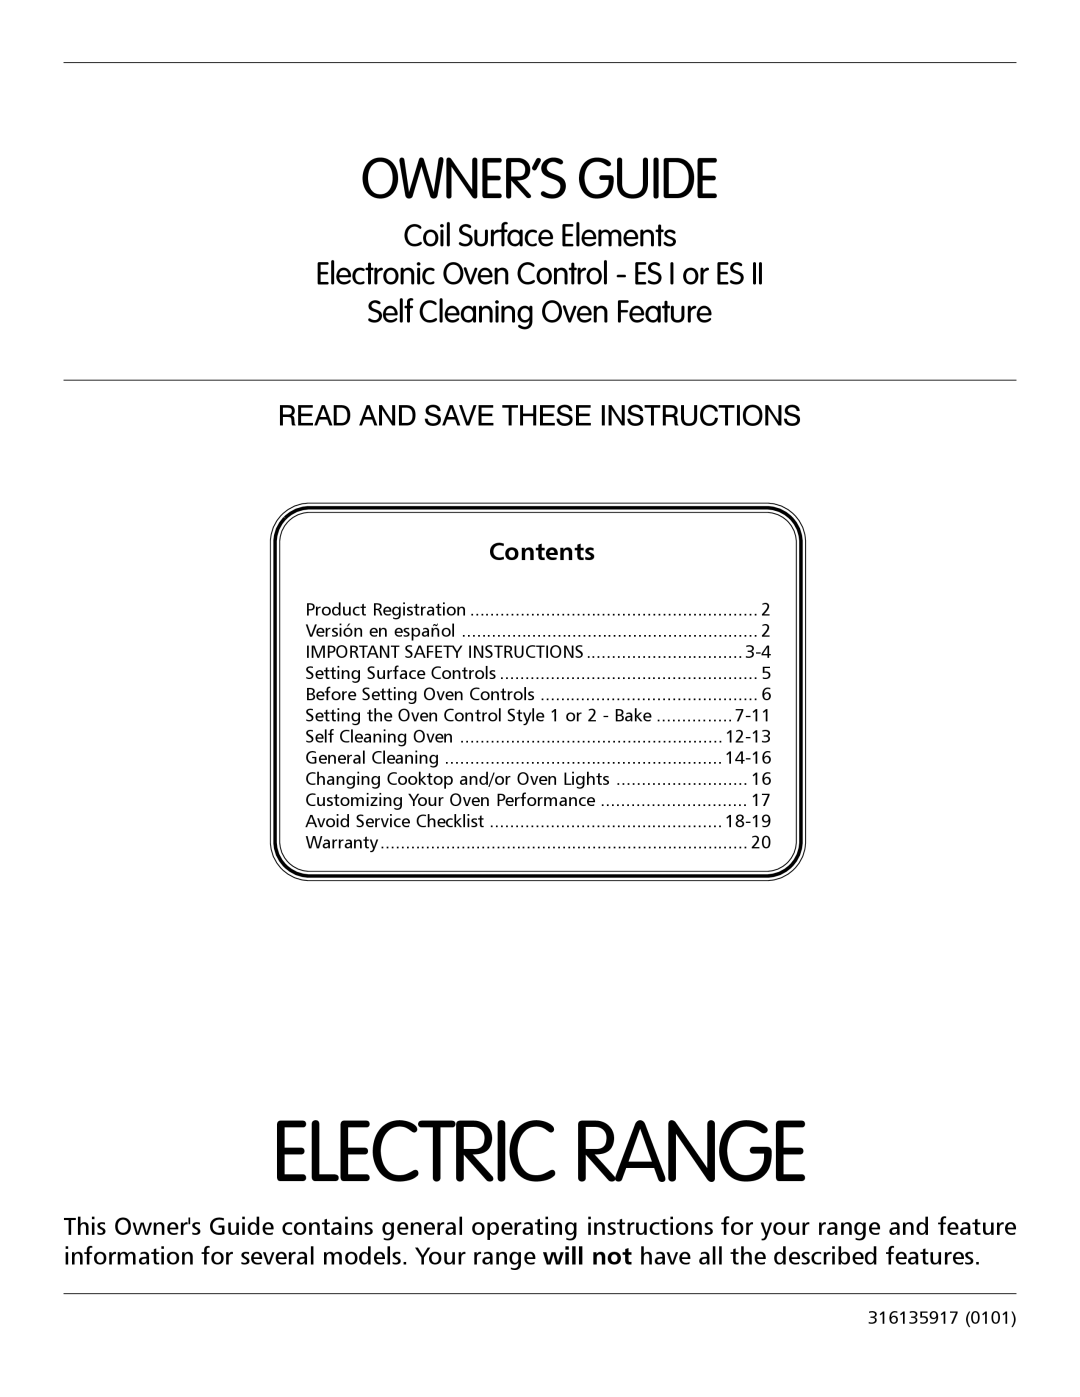 Frigidaire 316135917 important safety instructions Electric Range, Owner’S Guide, Self Cleaning Oven Feature, Contents 